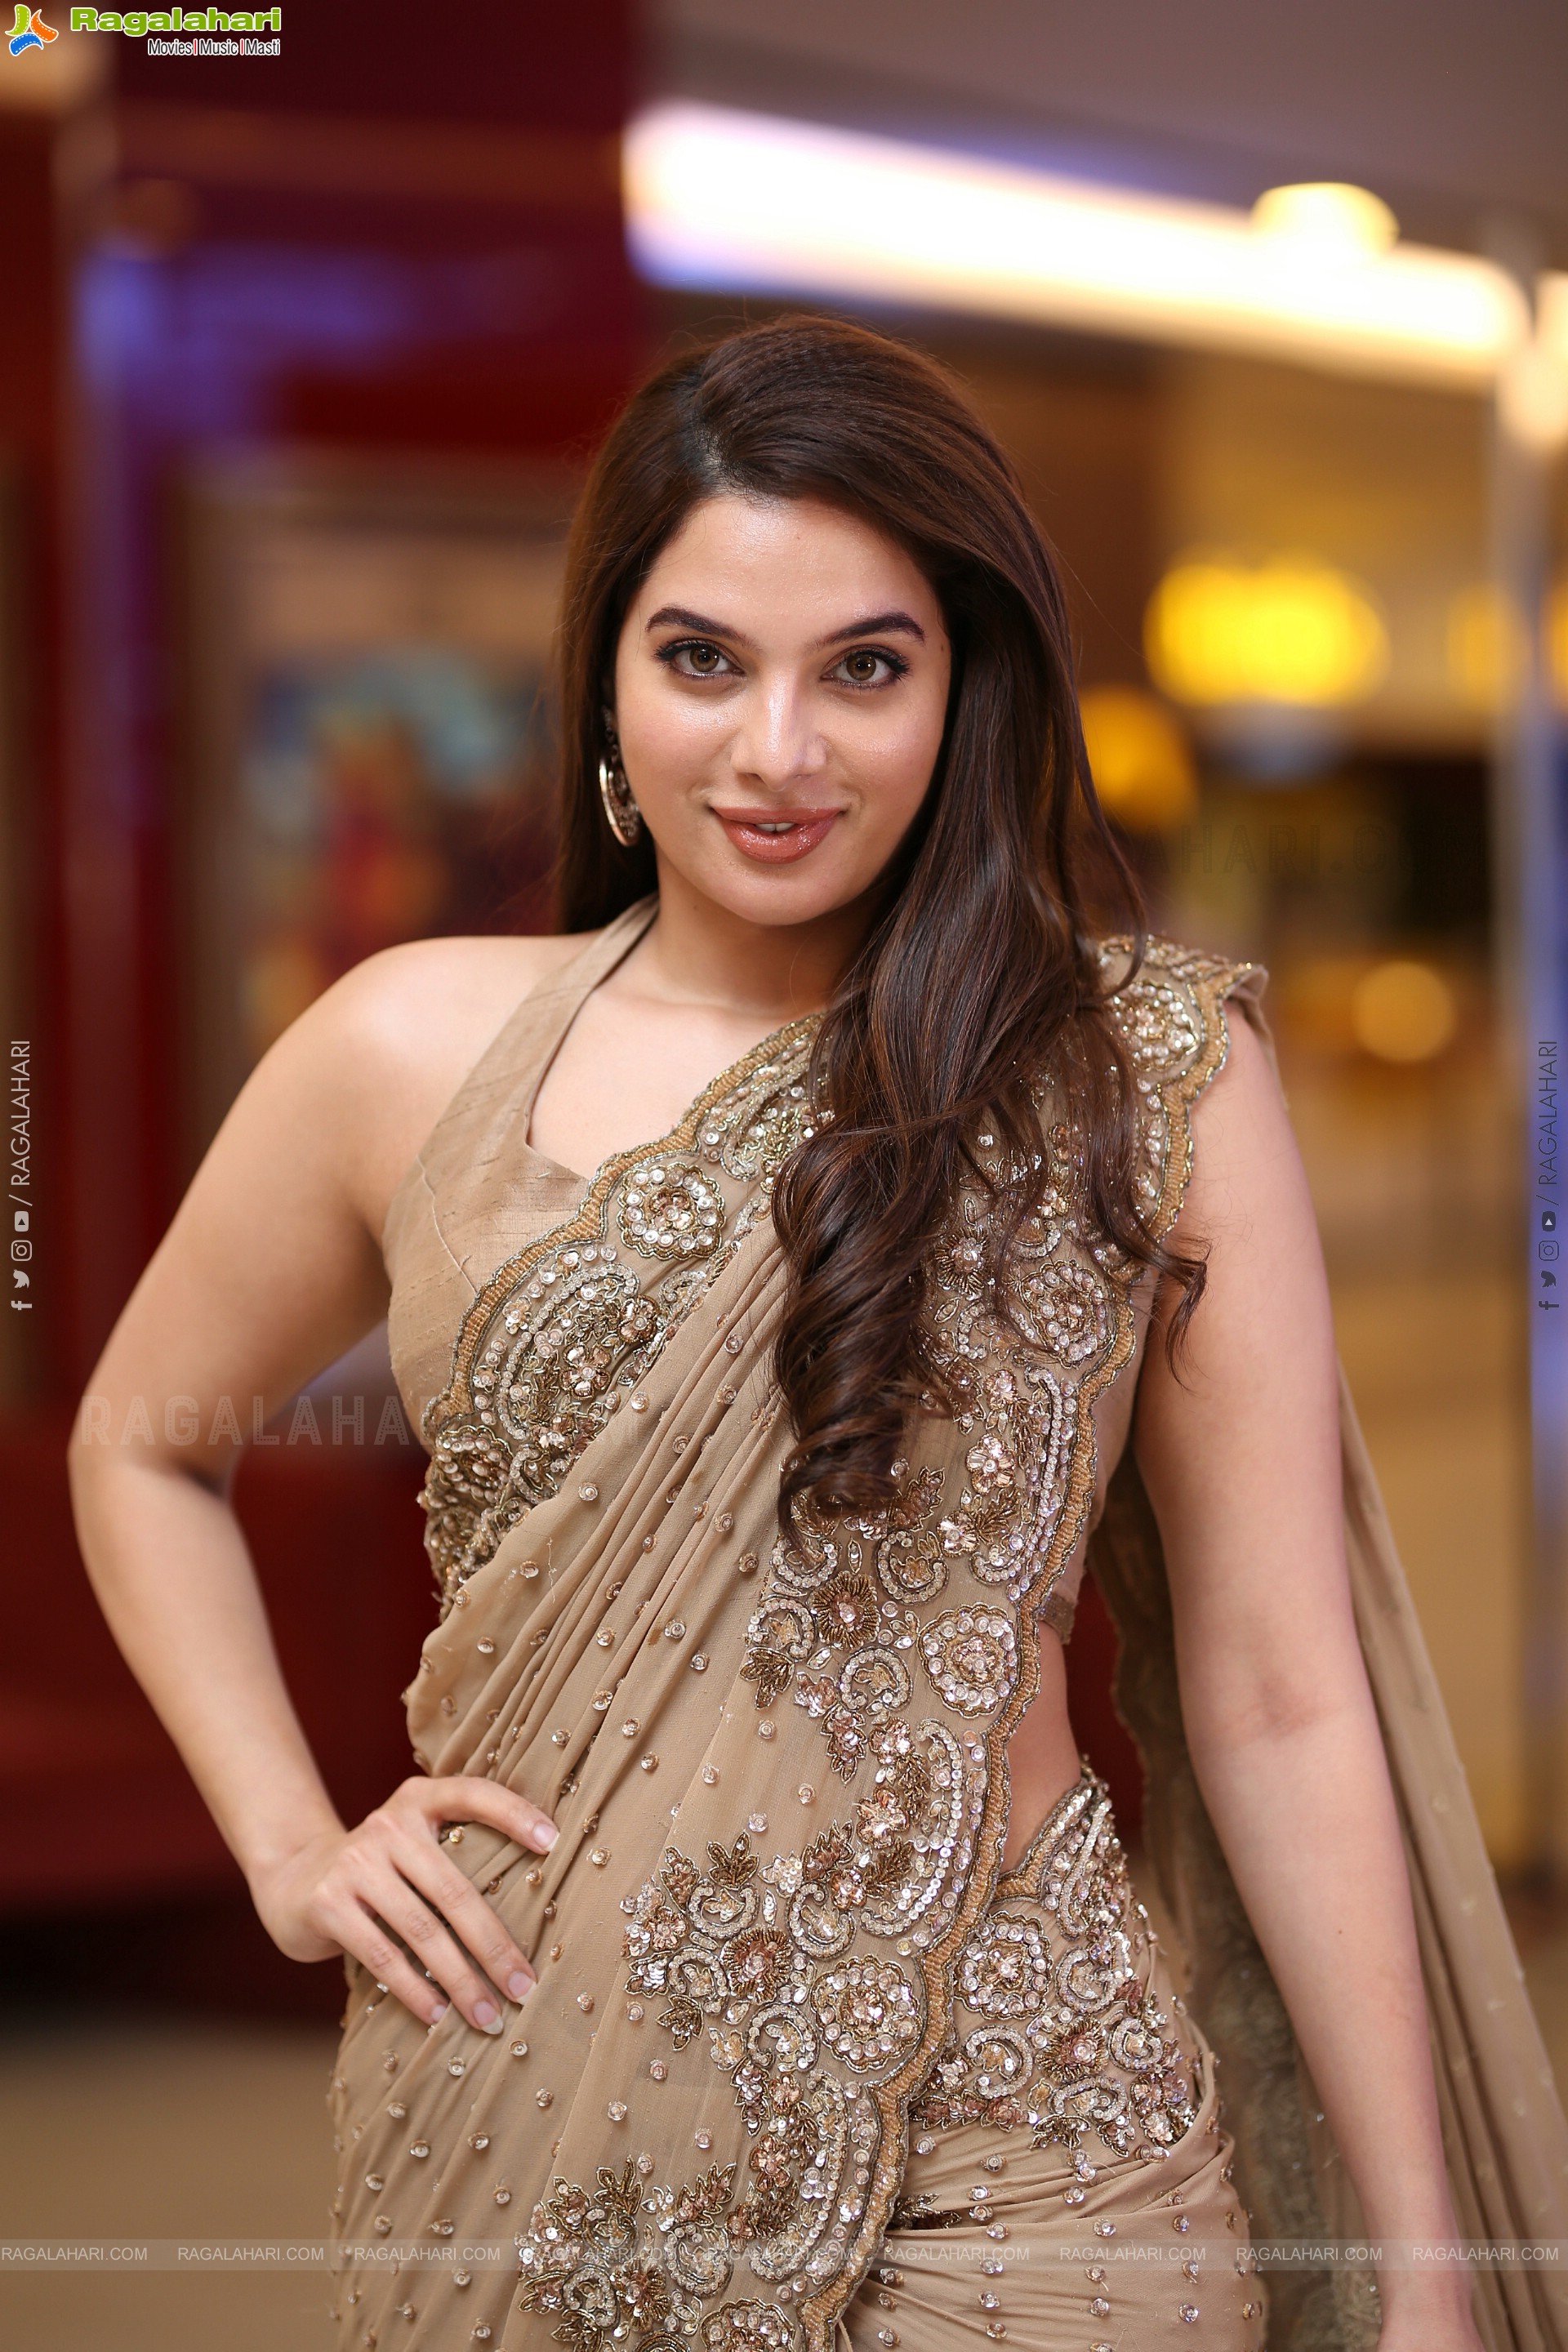 Tanya Hope at Weapon Movie Trailer Launch, HD Gallery